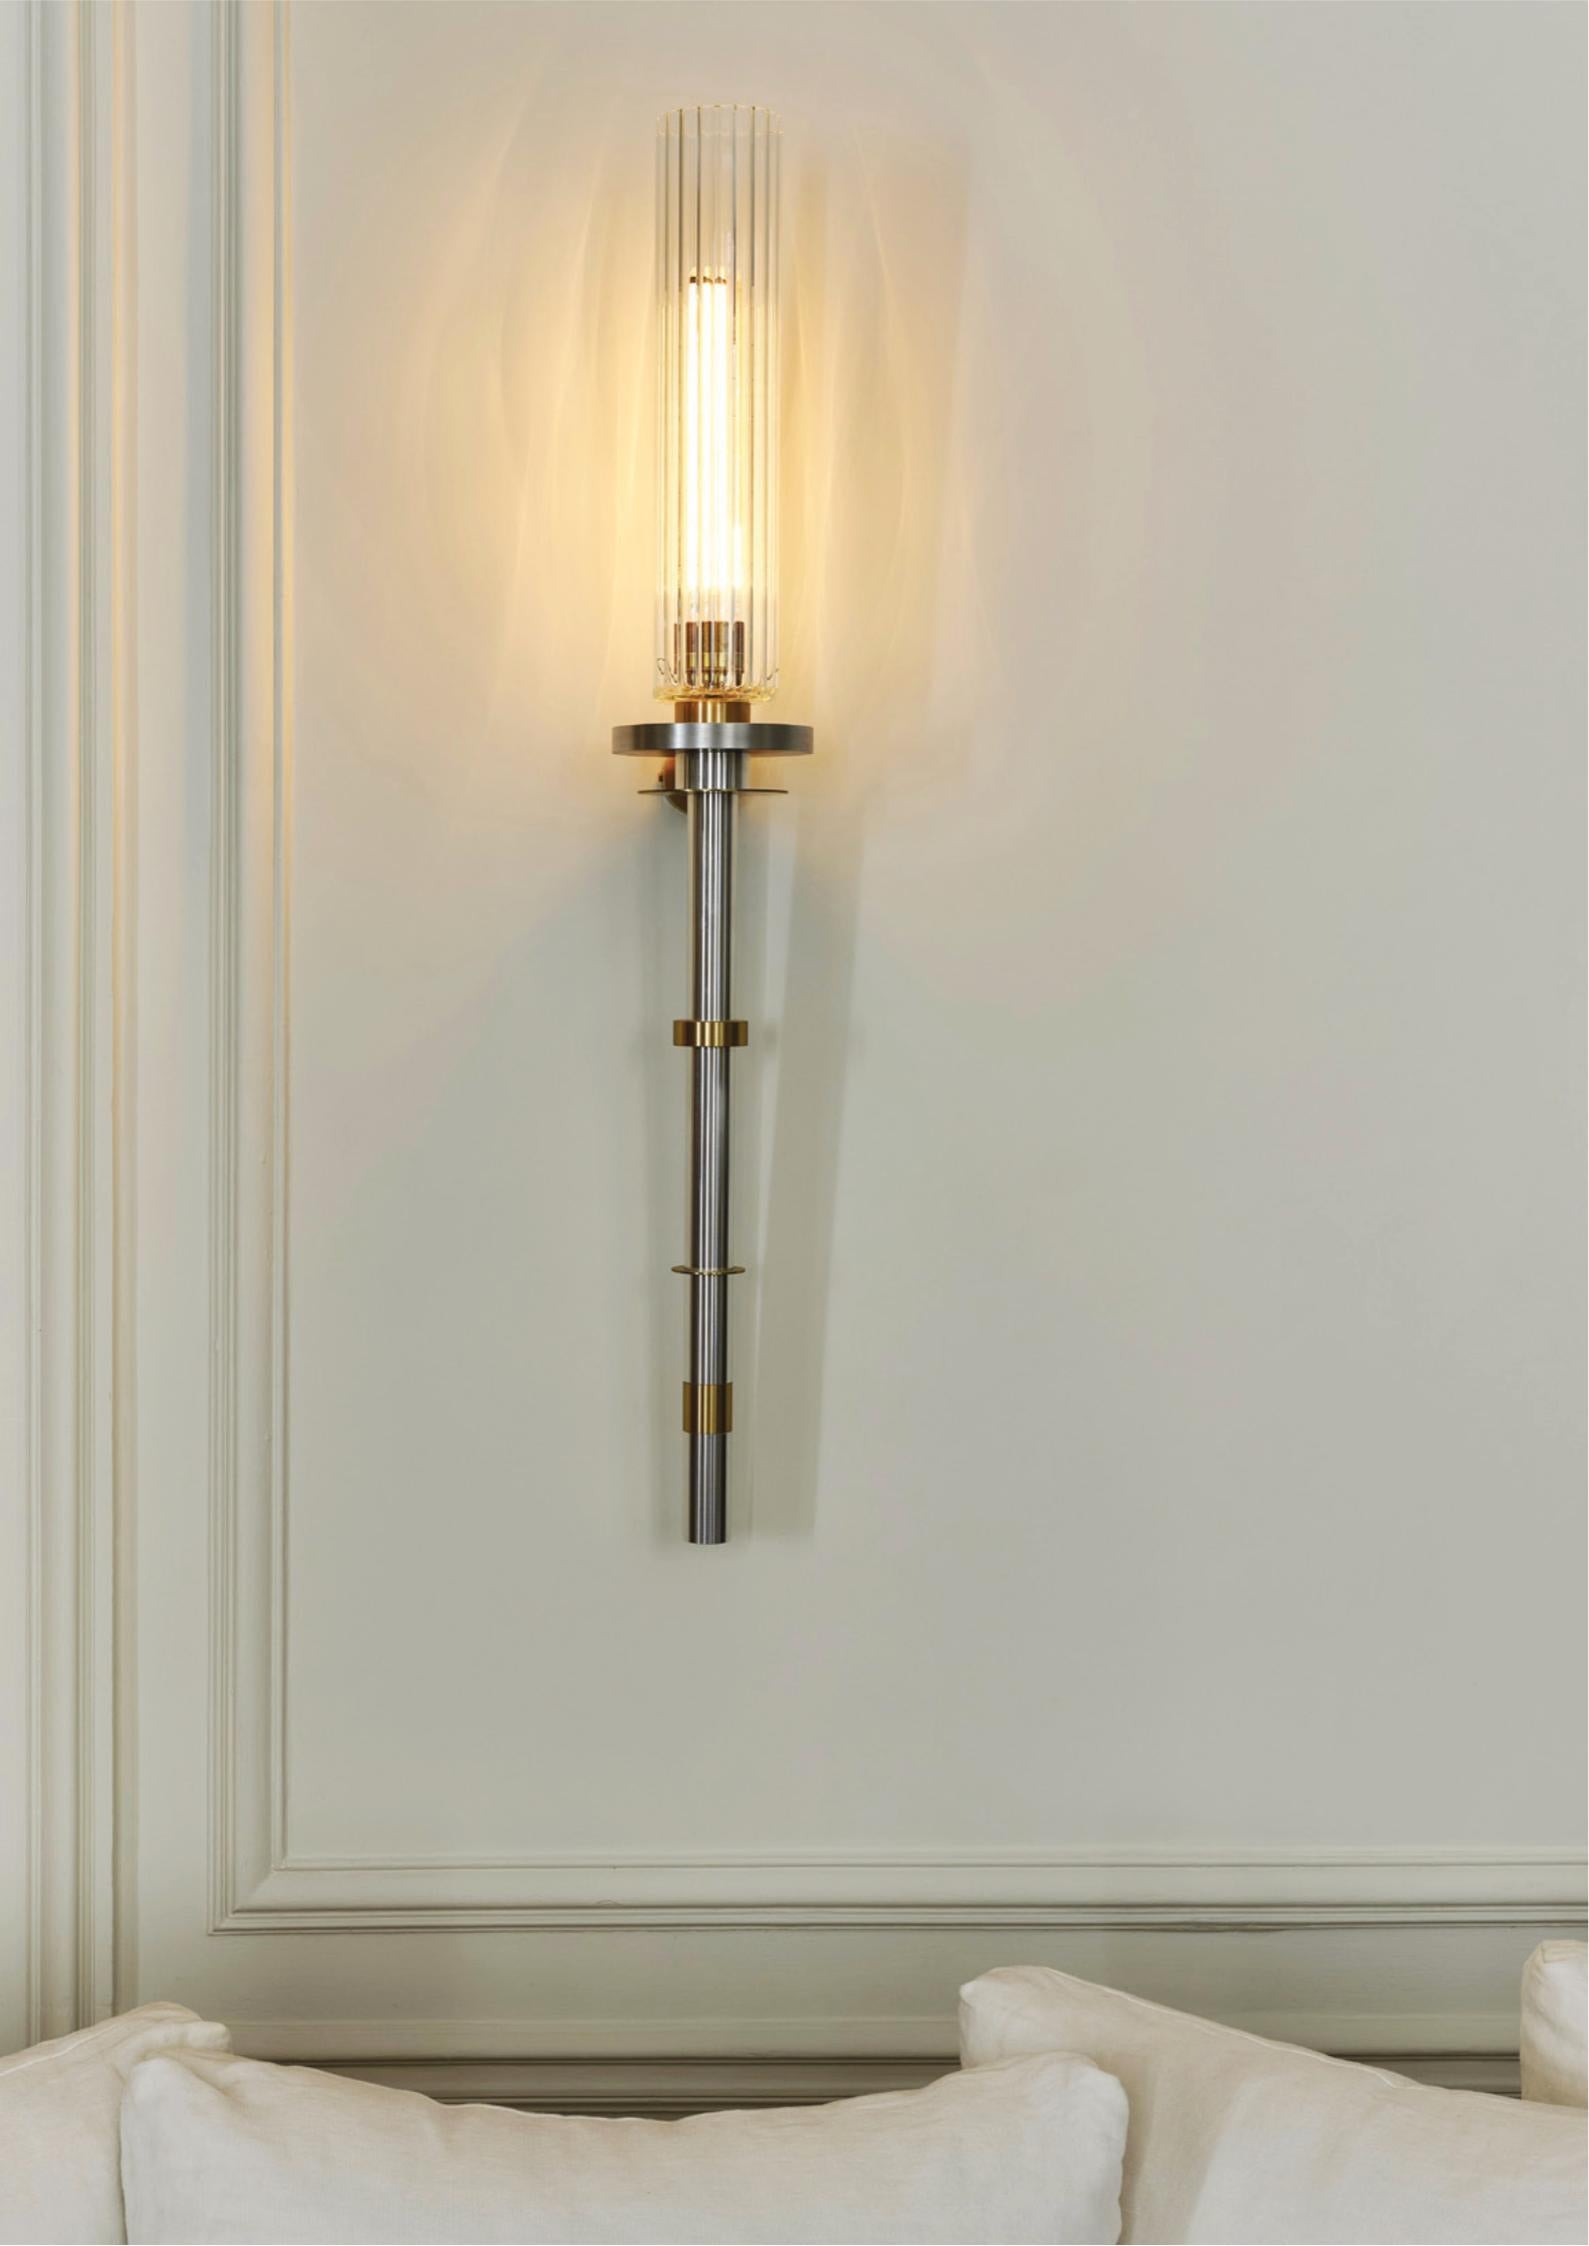 Art Deco 21st C Contemporary Marine Breynaert Wall Sconce Lamp Brushed Brass Glass Green For Sale